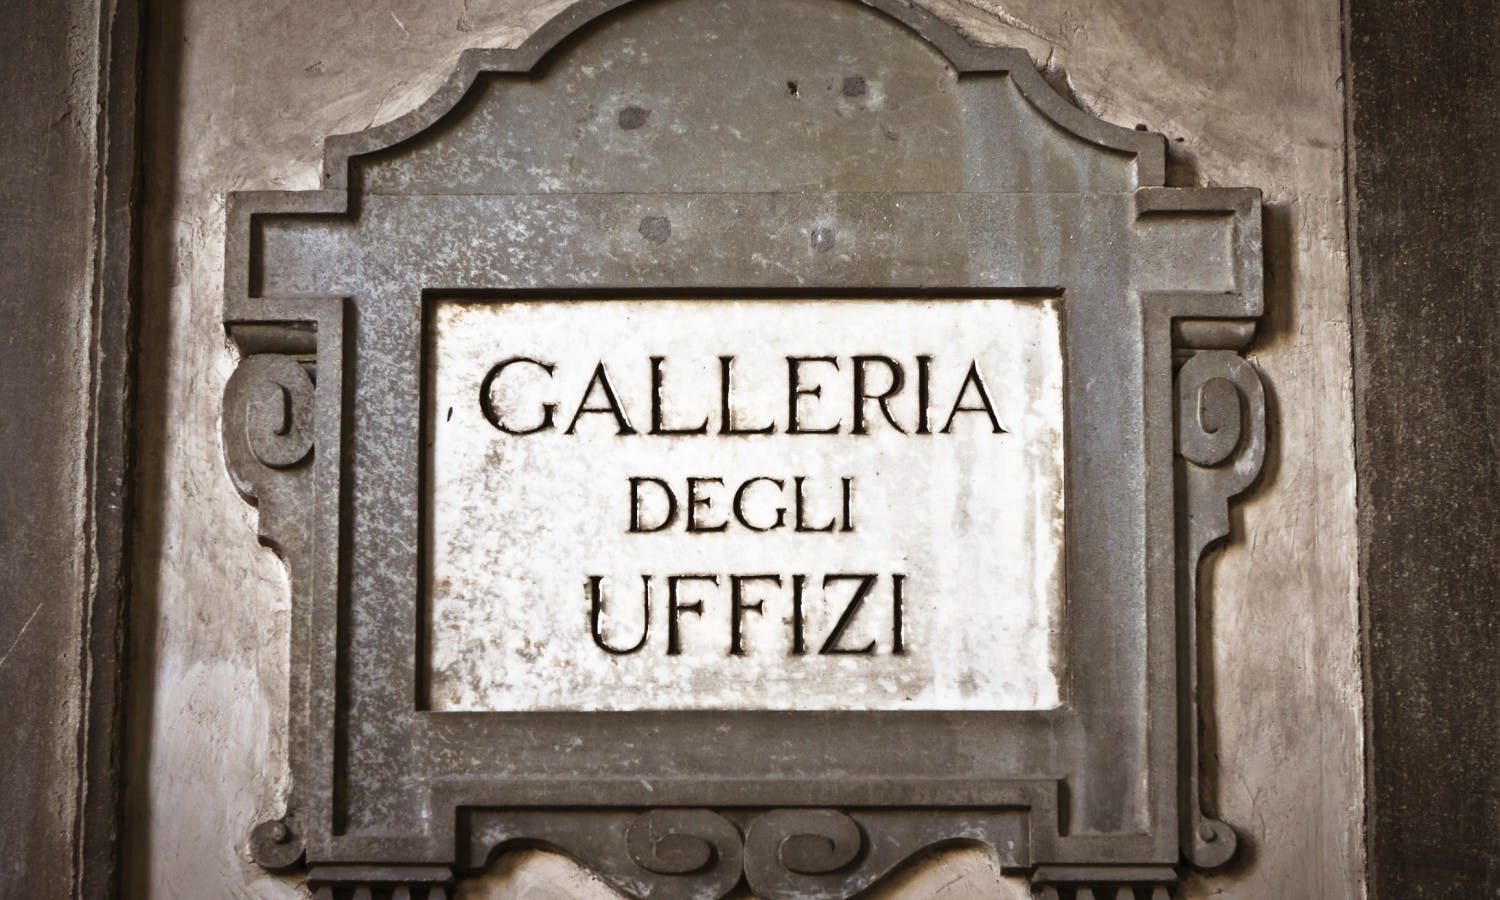 Florence walking tour with Uffizi Gallery tickets and guided visit